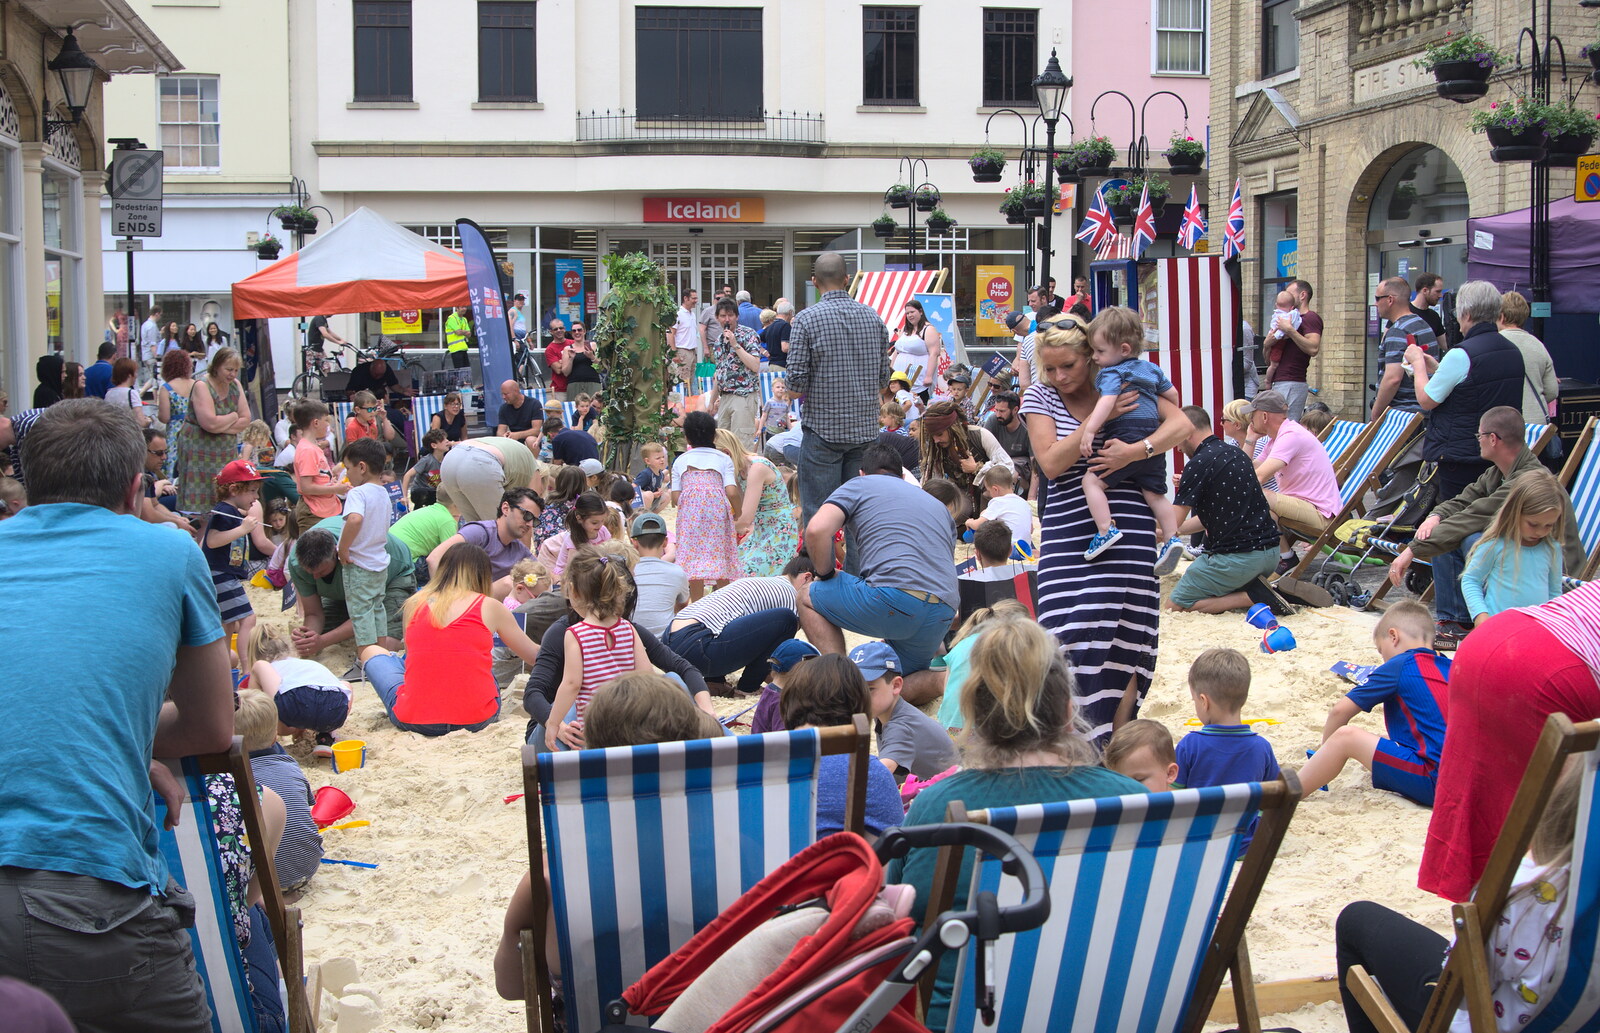 A fake beach has been set up in Bury St. Edmunds from Wavy and Martina's Combined Birthdays, Thrandeston, Suffolk - 27th May 2017